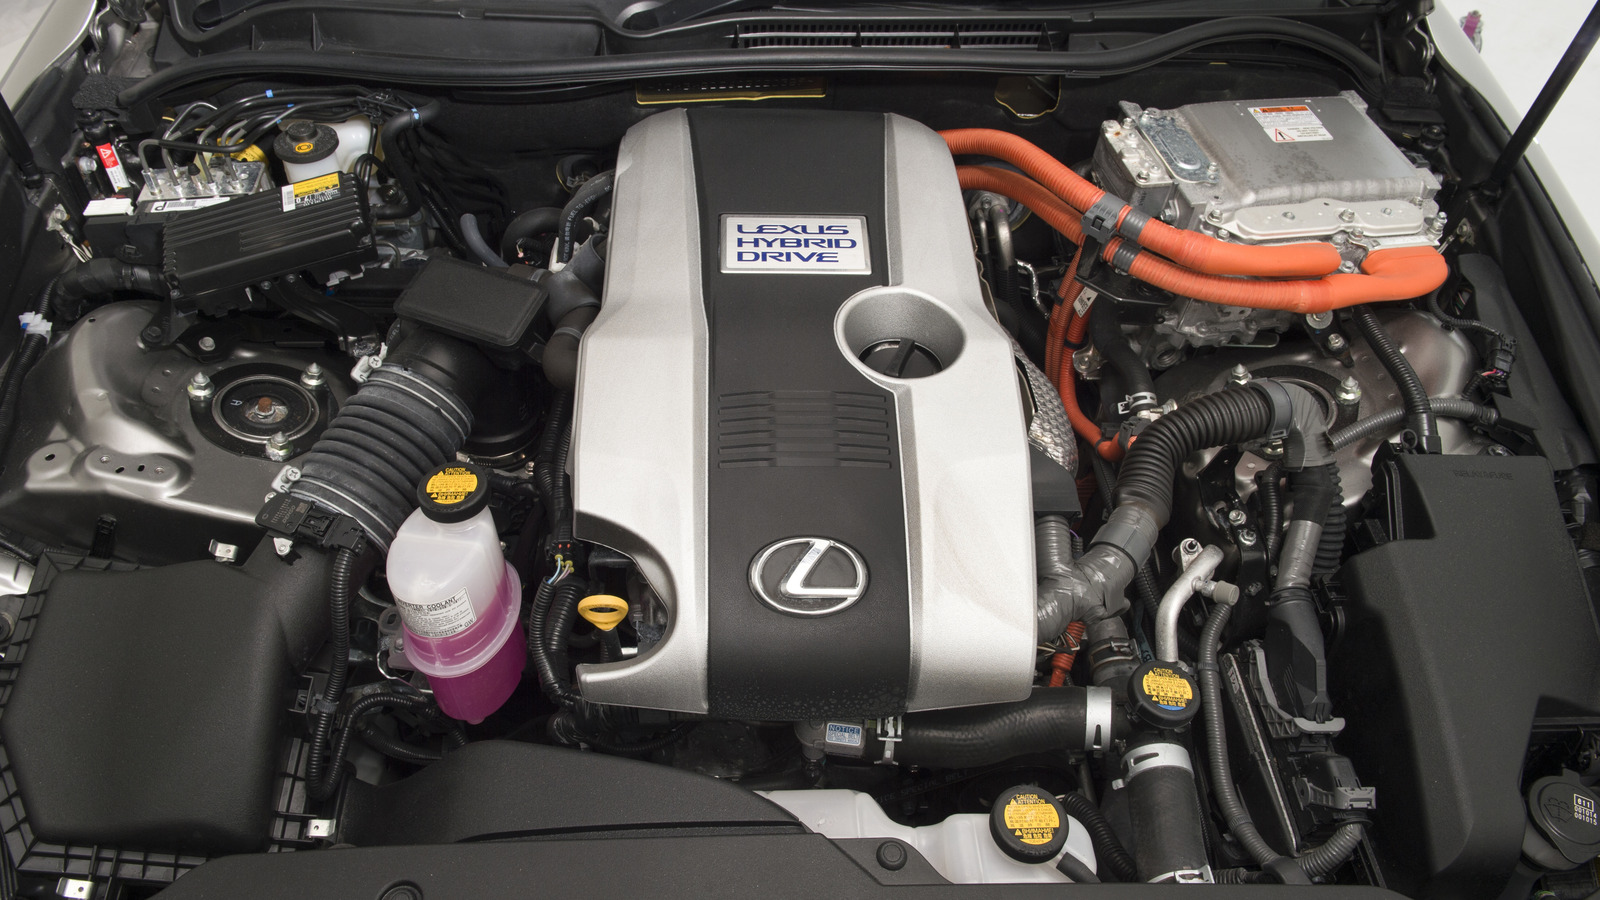 Are Lexus And Toyota Engines Made In The Same Factory?